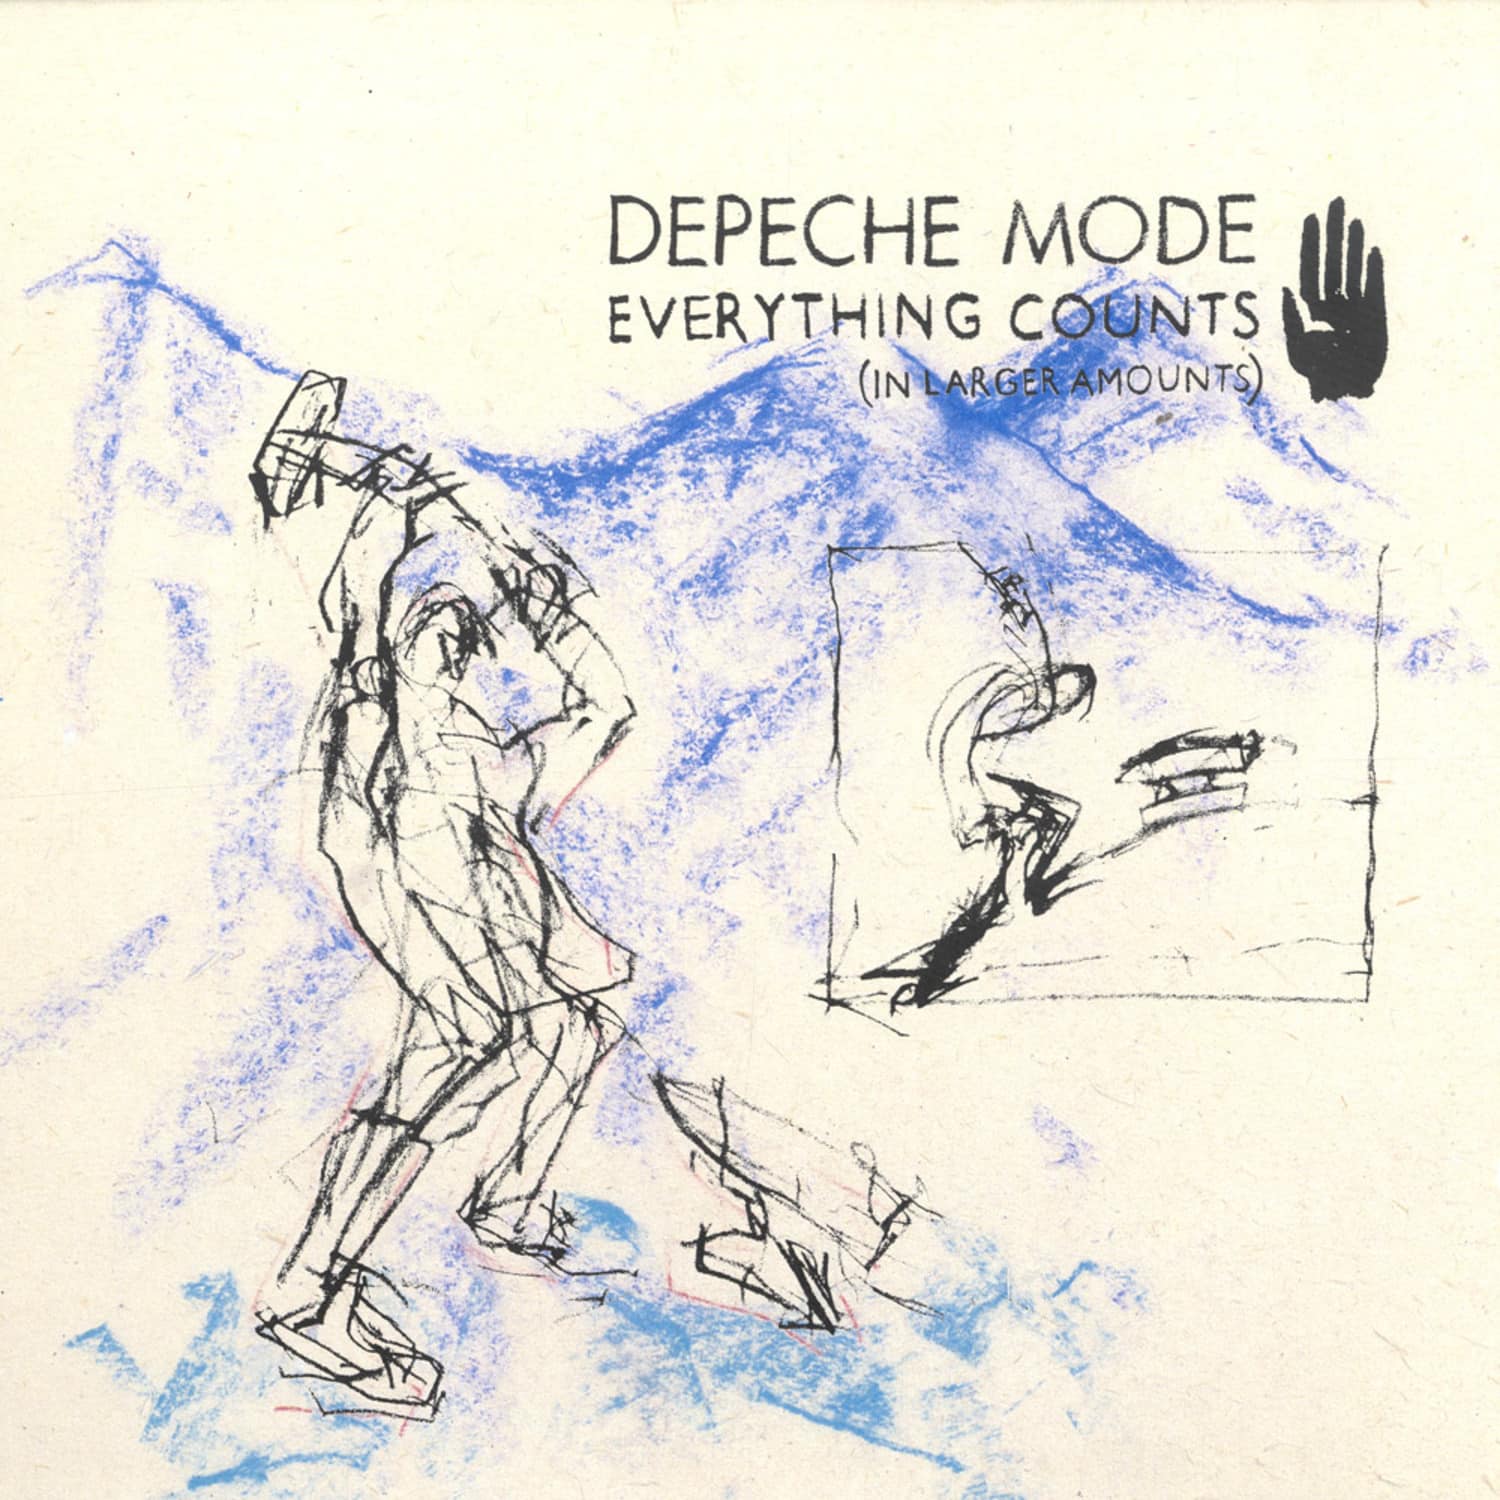 Depeche Mode - EVERYTHING COUNTS